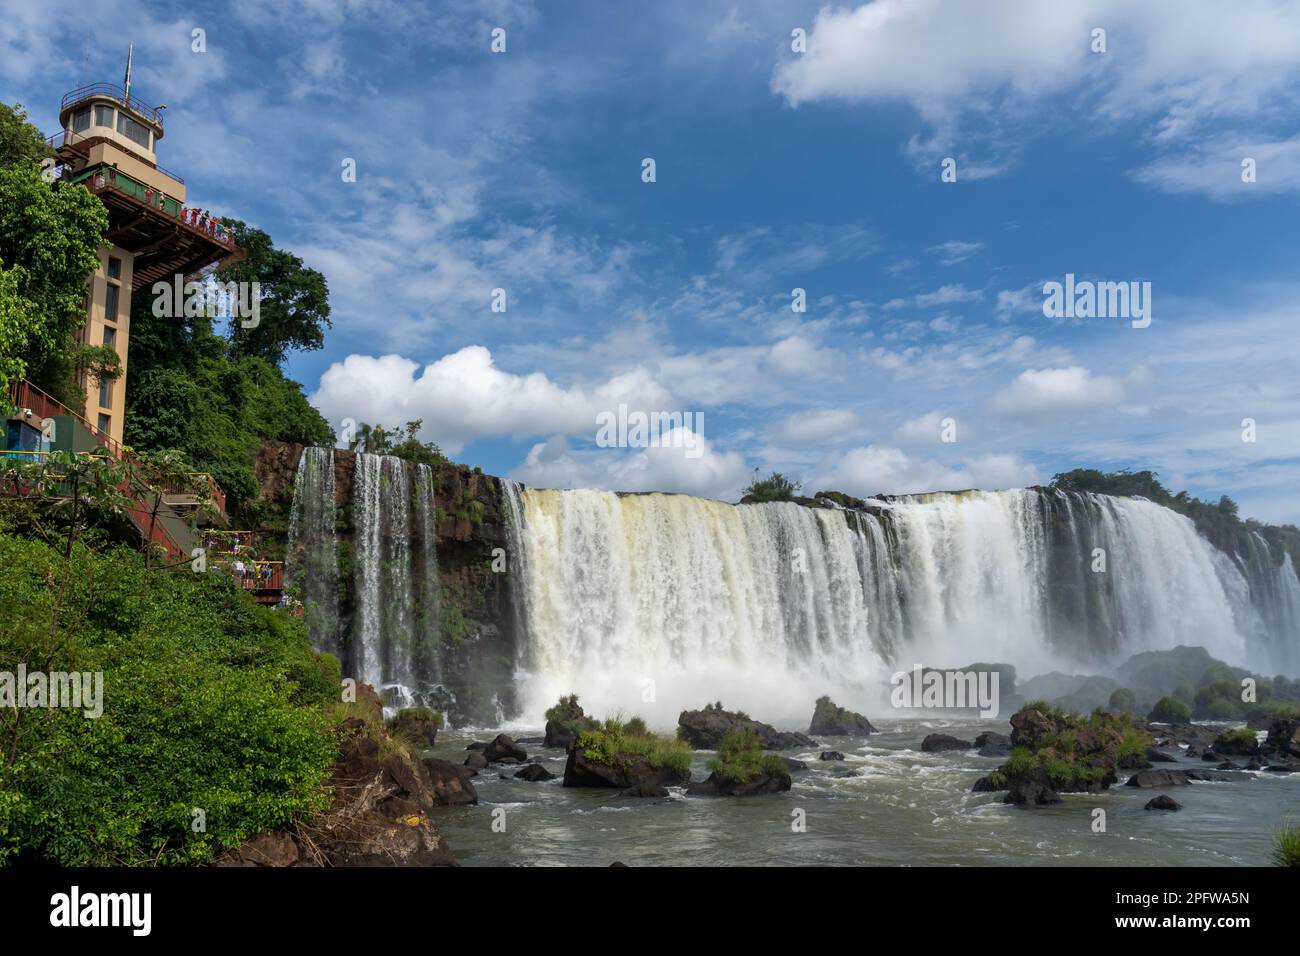 The Observation tower with unrecognized people and view of the Iguazu Falls in the National Park in Foz do Iguacu, Brazil. The Iguazu NP is an attract Stock Photo